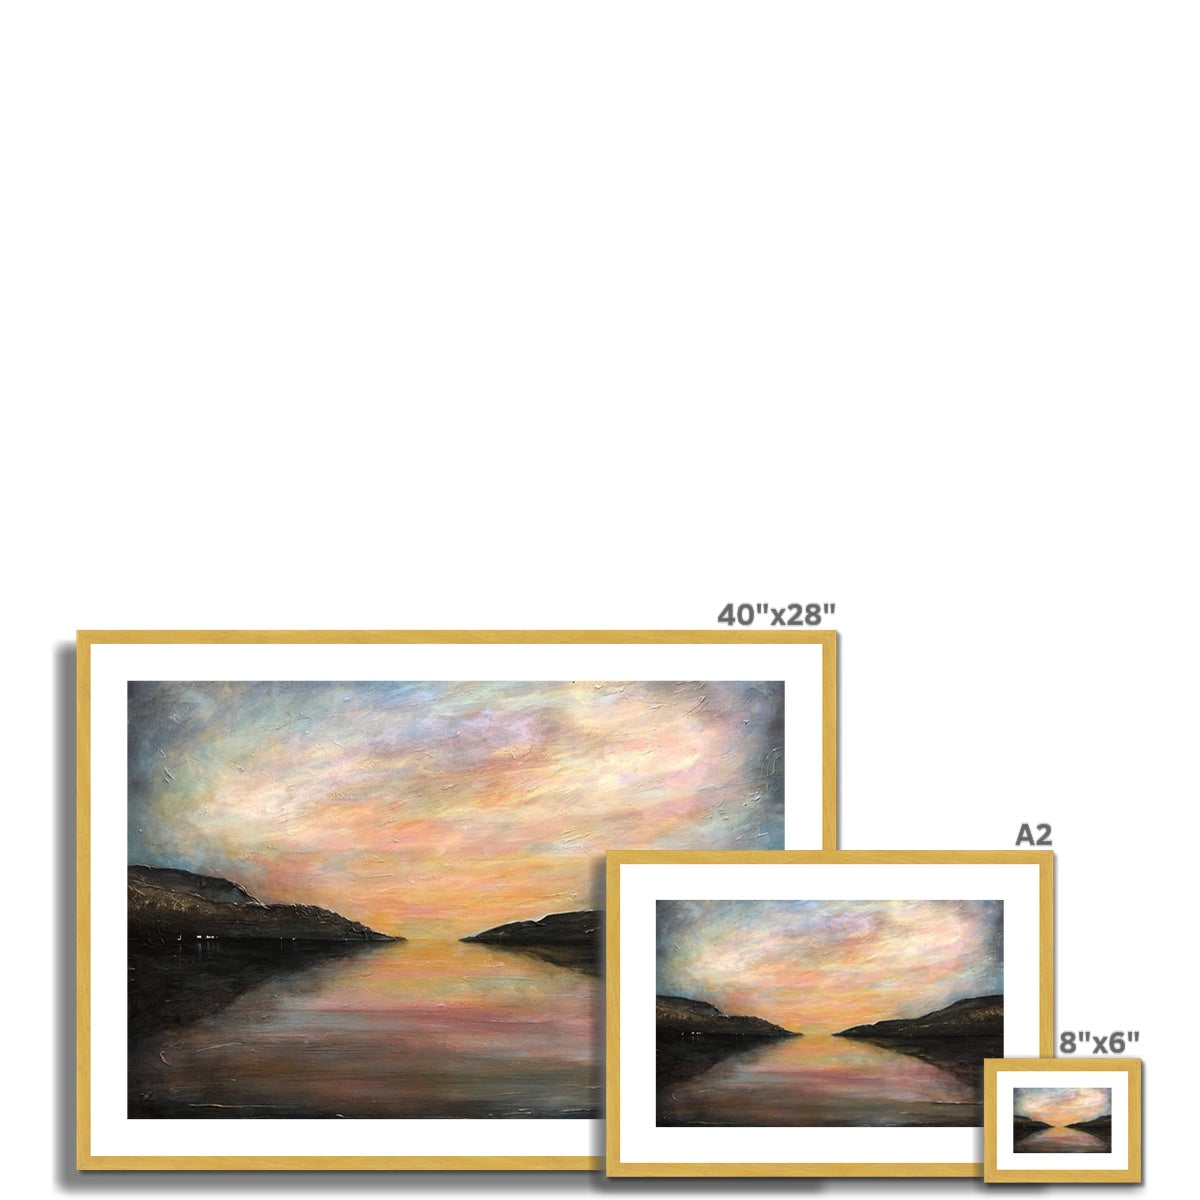 Loch Ness Glow Painting | Antique Framed & Mounted Prints From Scotland-Antique Framed & Mounted Prints-Scottish Lochs & Mountains Art Gallery-Paintings, Prints, Homeware, Art Gifts From Scotland By Scottish Artist Kevin Hunter